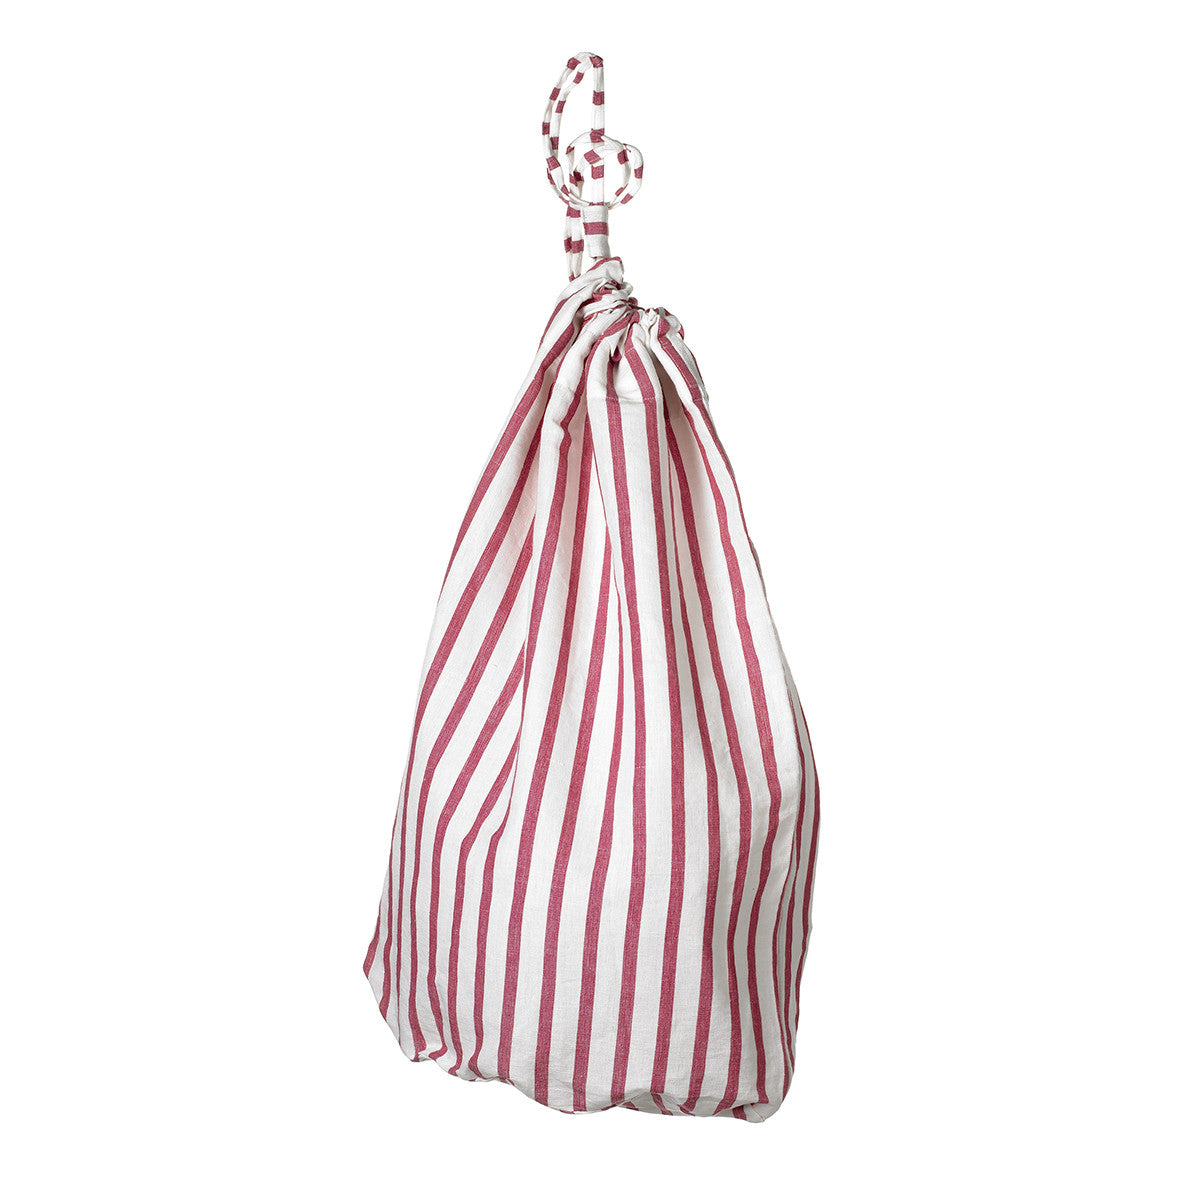 Autumn Ticking Stripe Drawstring Cotton Linen Laundry and Storage Bag in Heather Pink ships from Canada (USA)